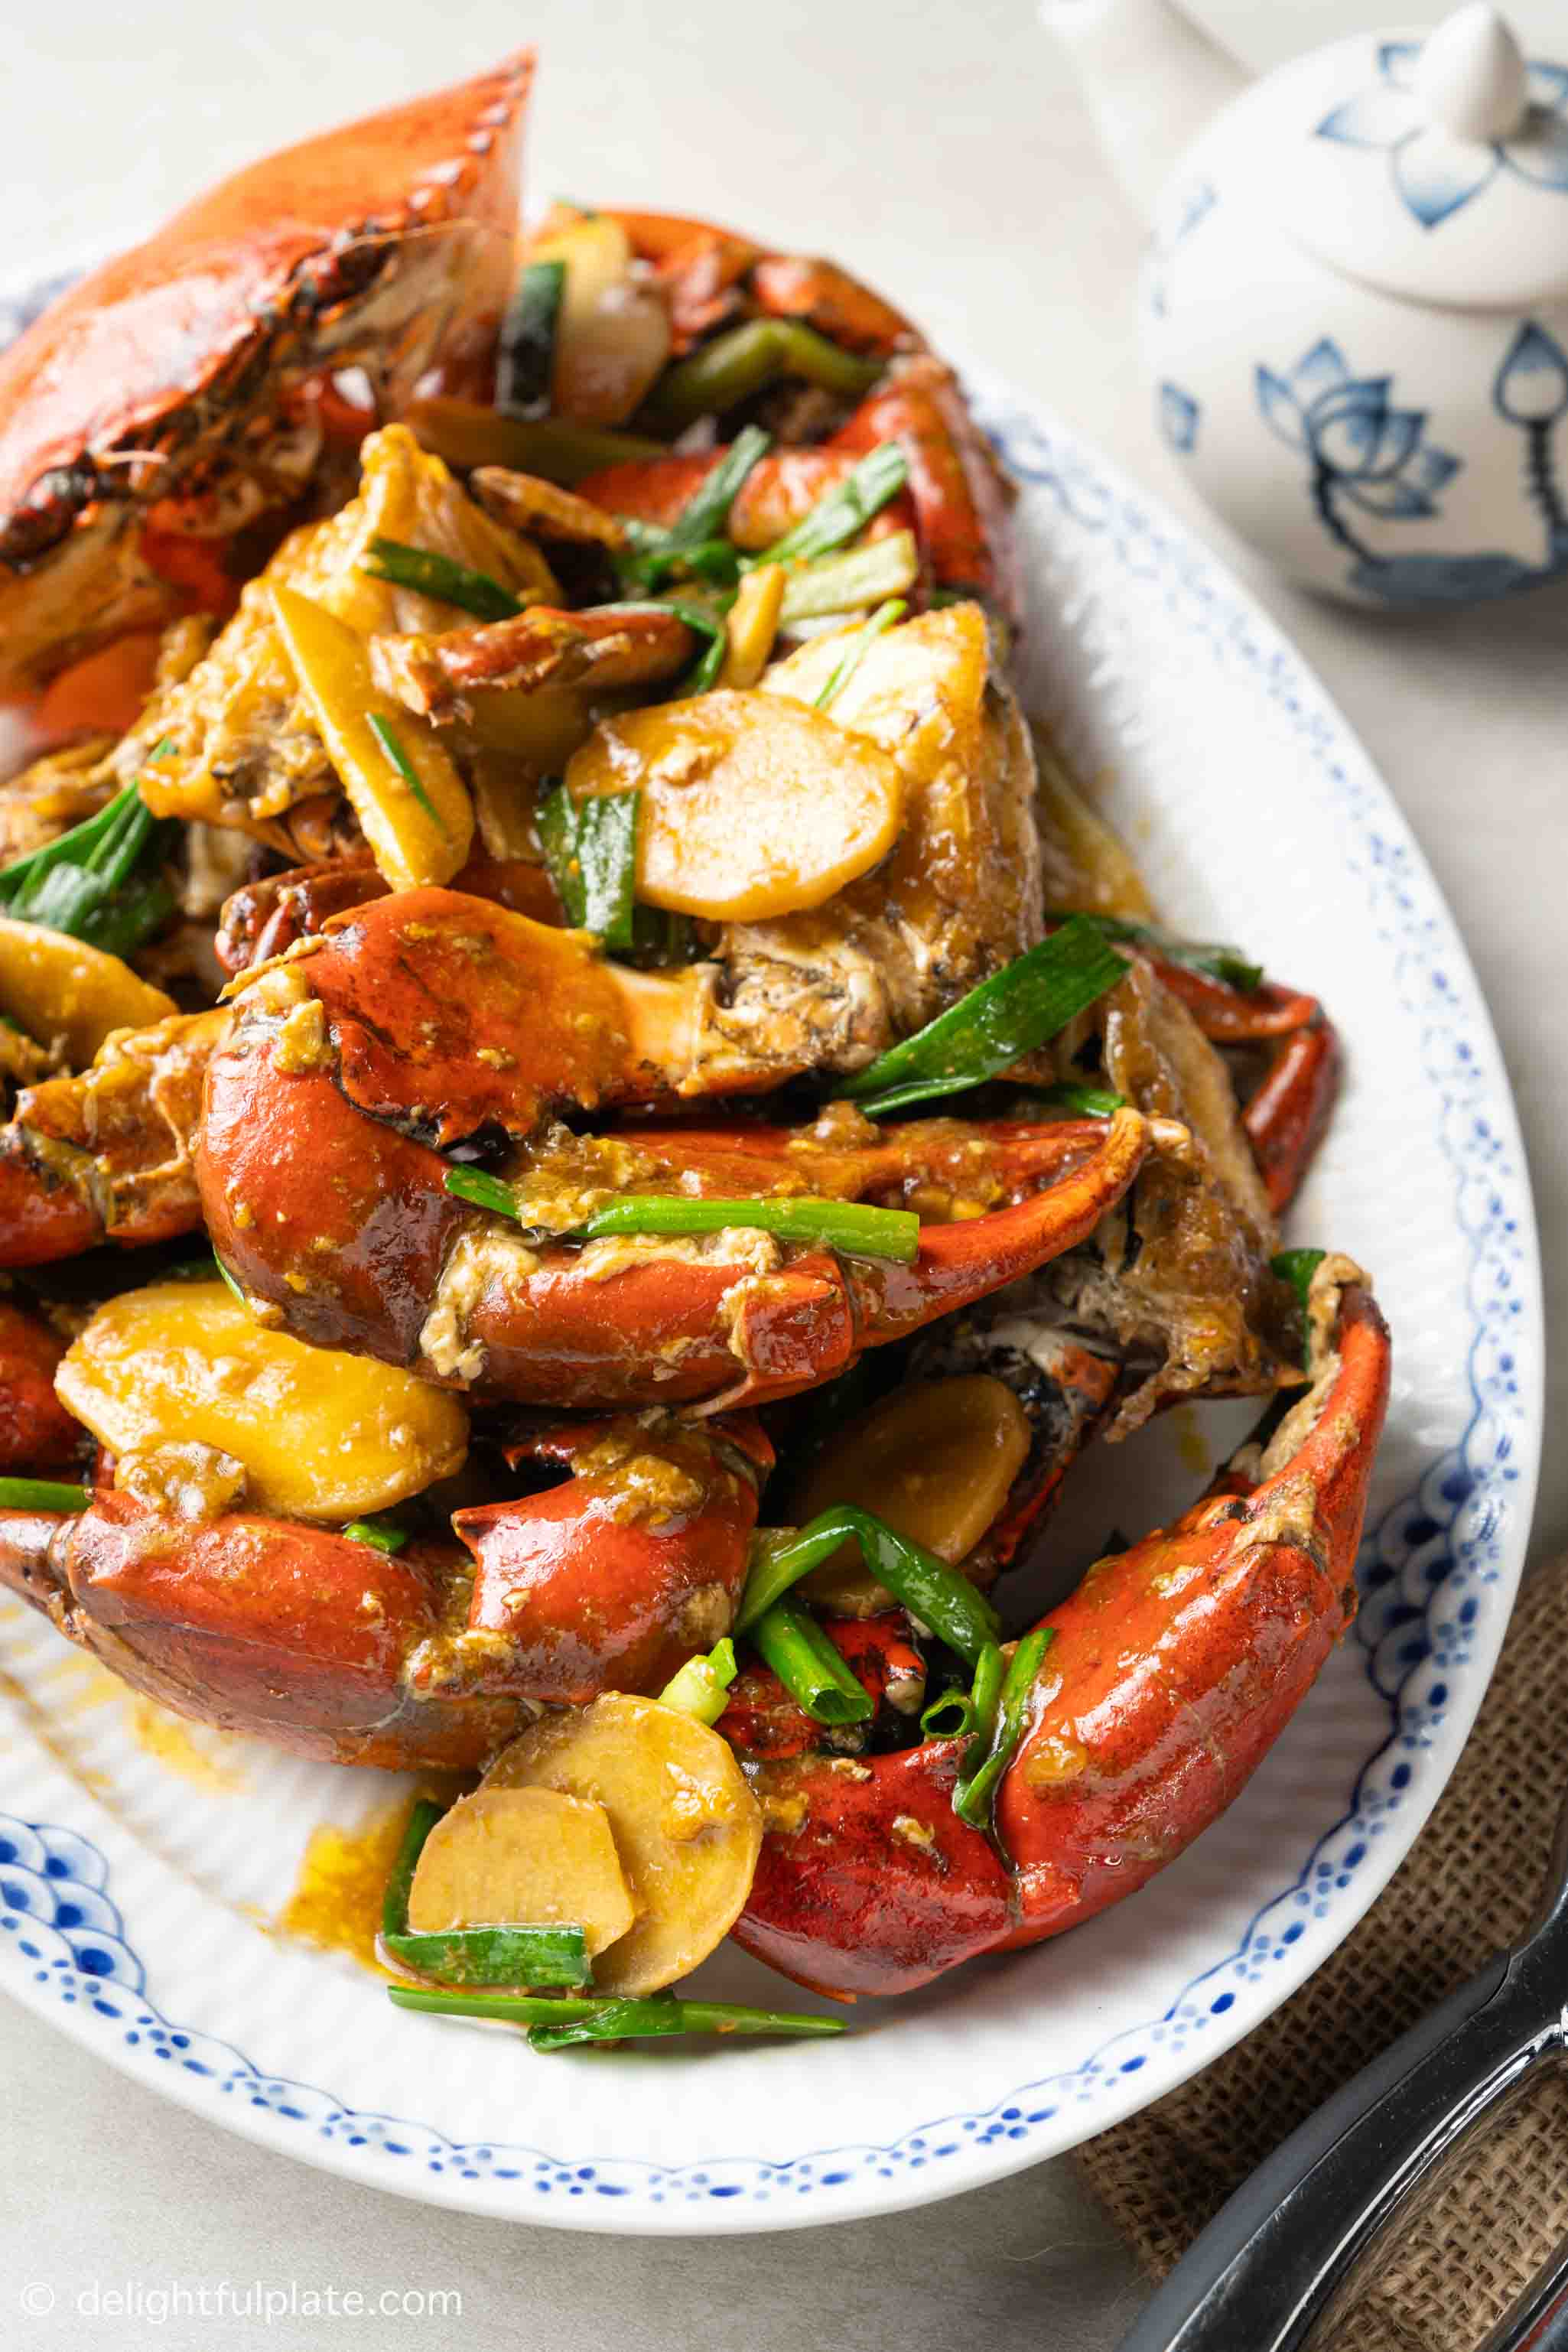 Stir-fried Crab with Ginger and Scallion